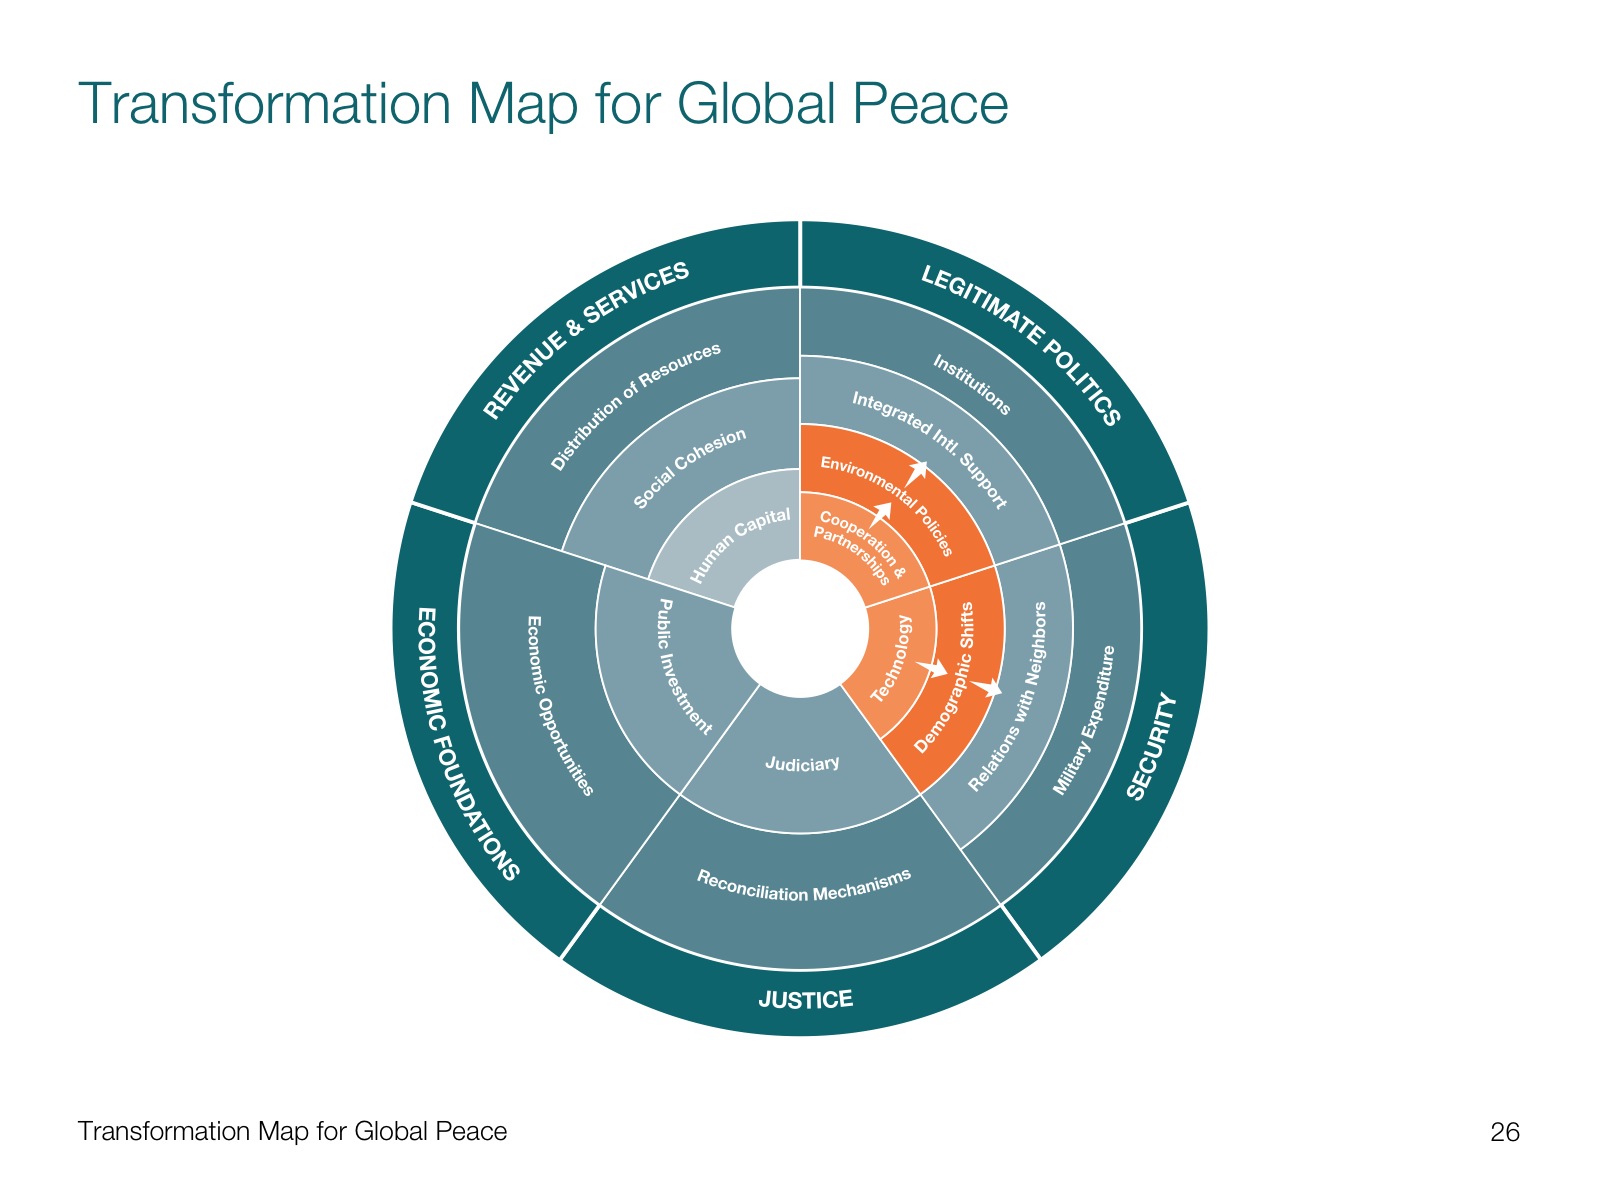 Project image 1 for Transformation Mapping Data Visualization, World Economic Forum